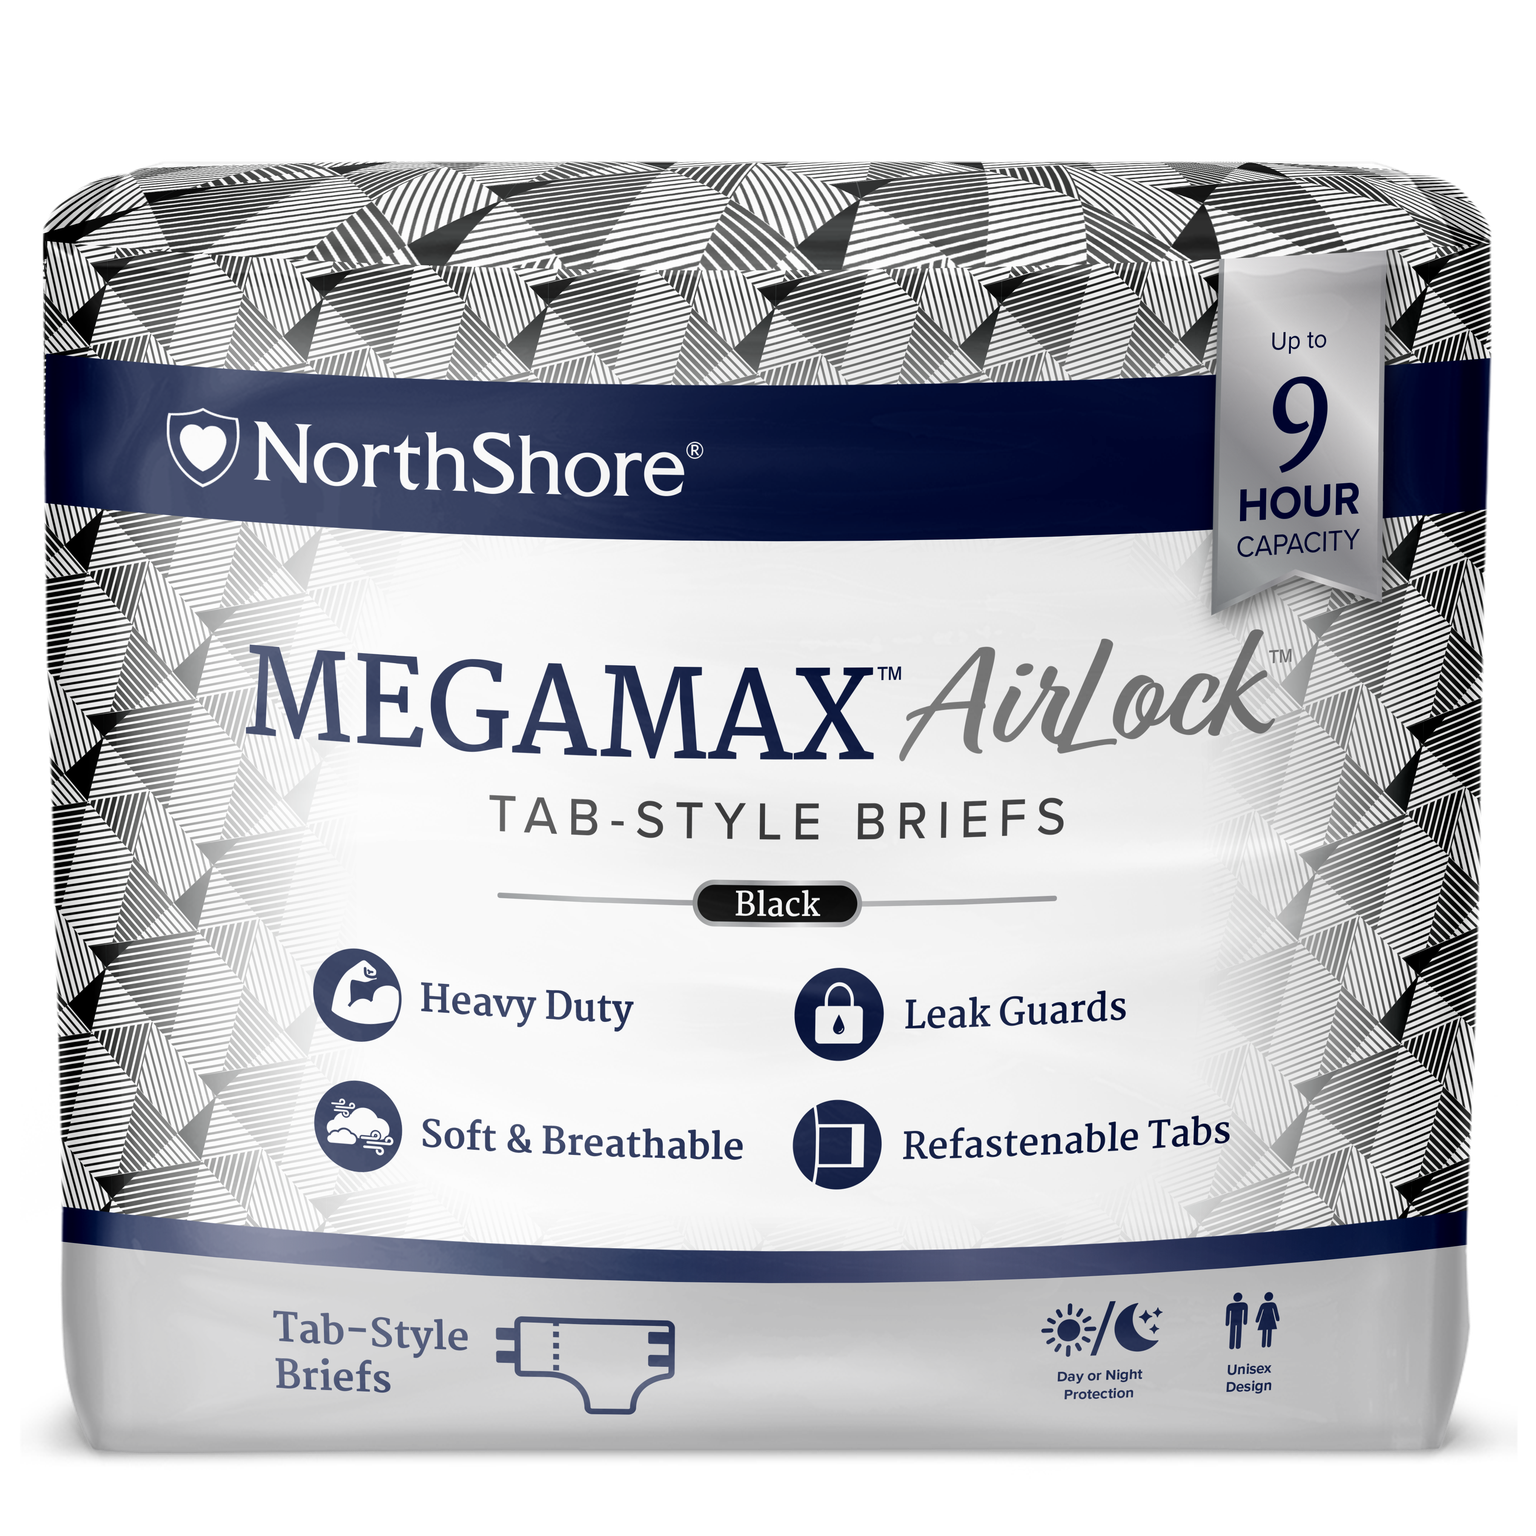 NorthShore MegaMax AirLock Lite Breathable Diaper Style Briefs with Tabs